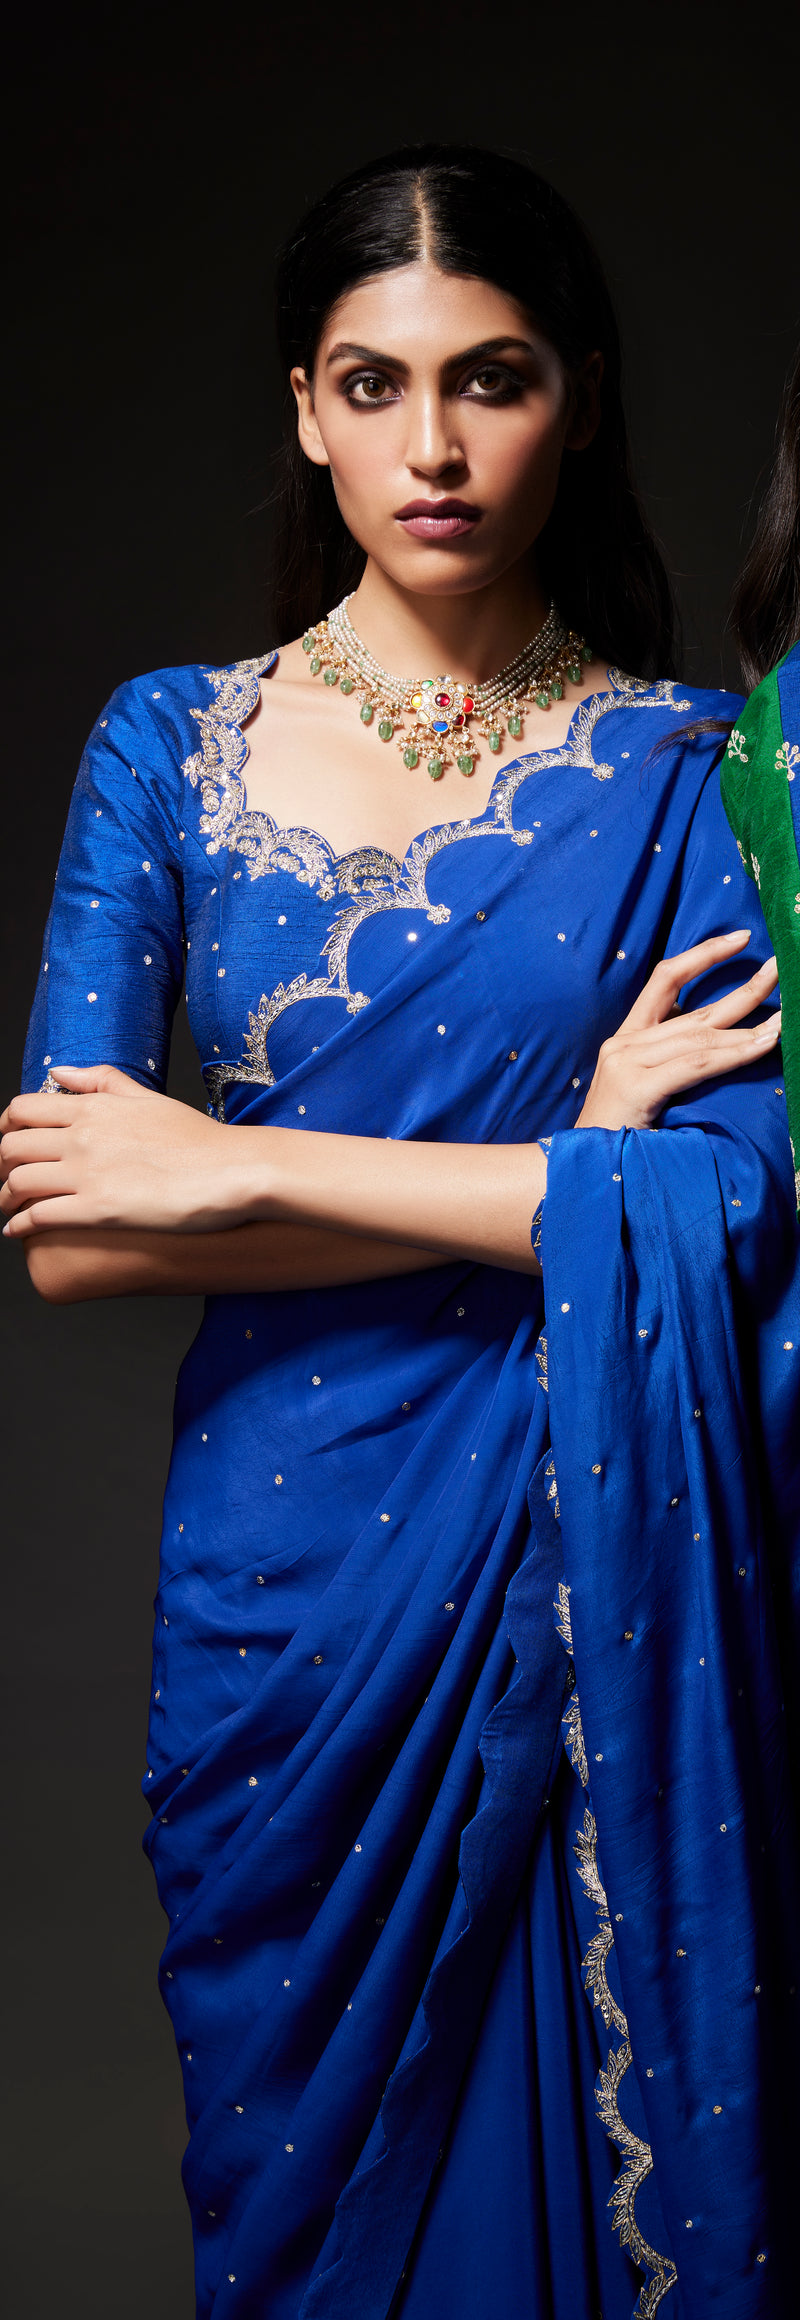 Midnight blue scallop embroidered saree & blouse